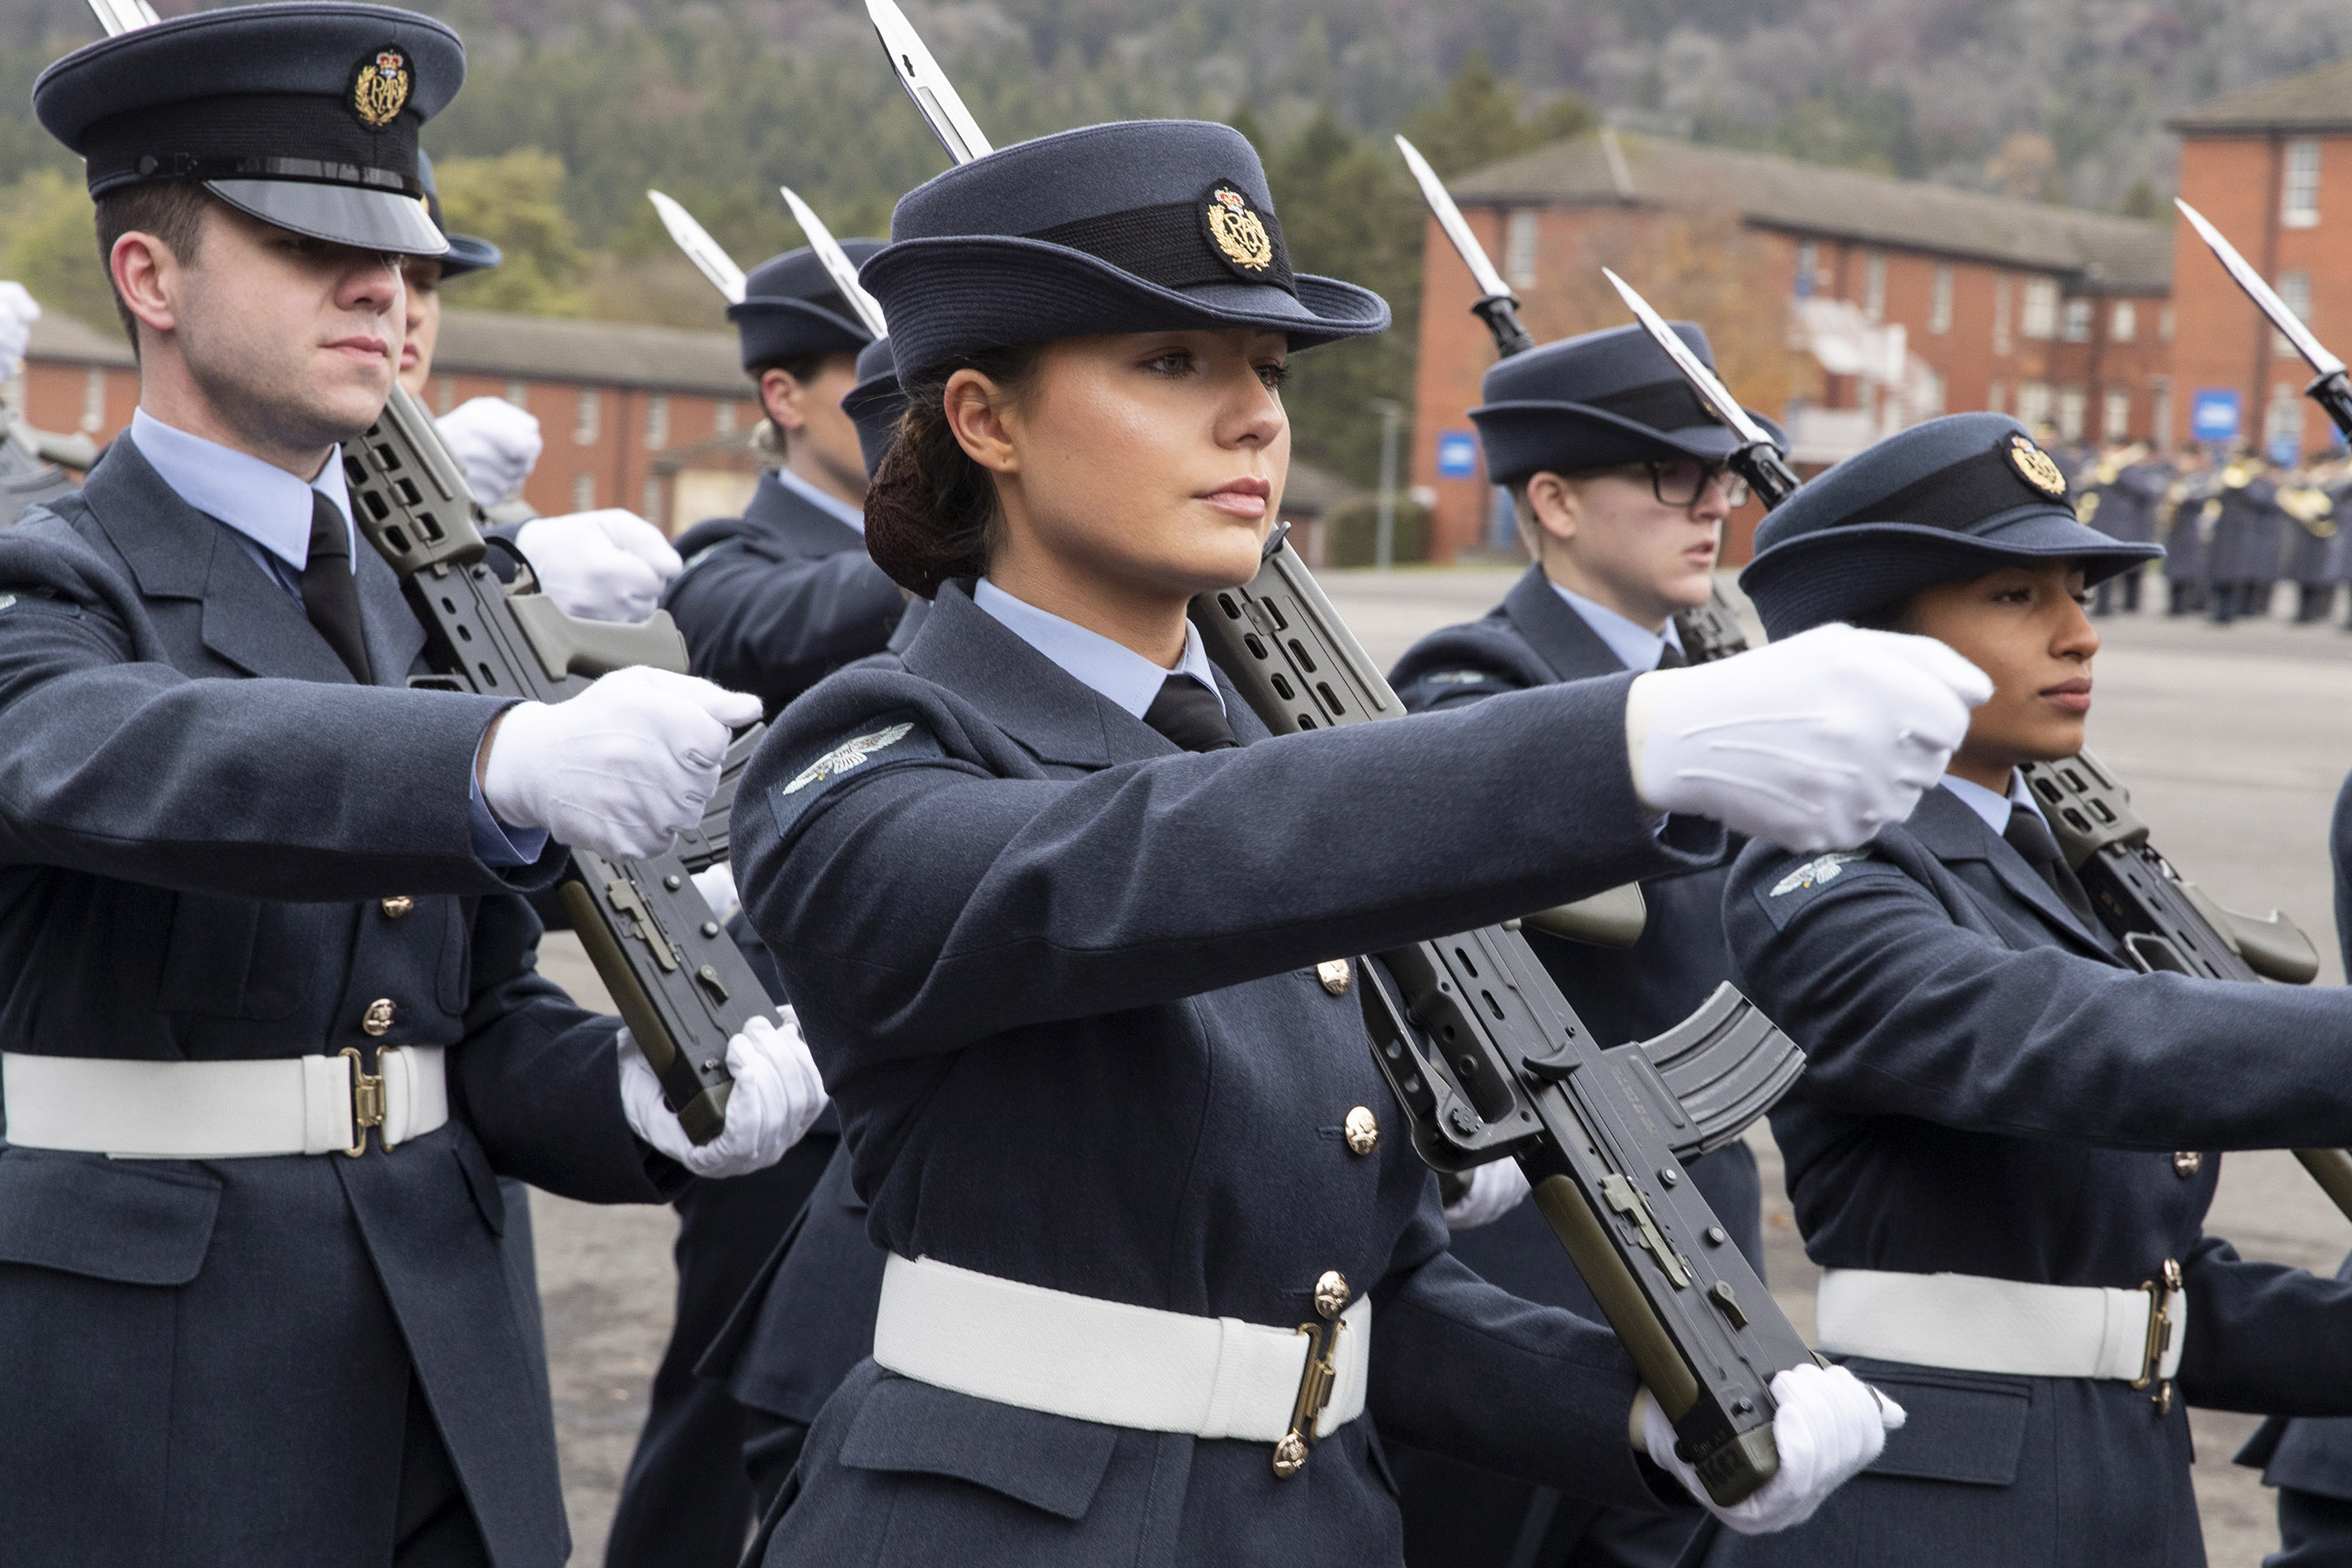 Image shows RAF graduates with rifles during parade.